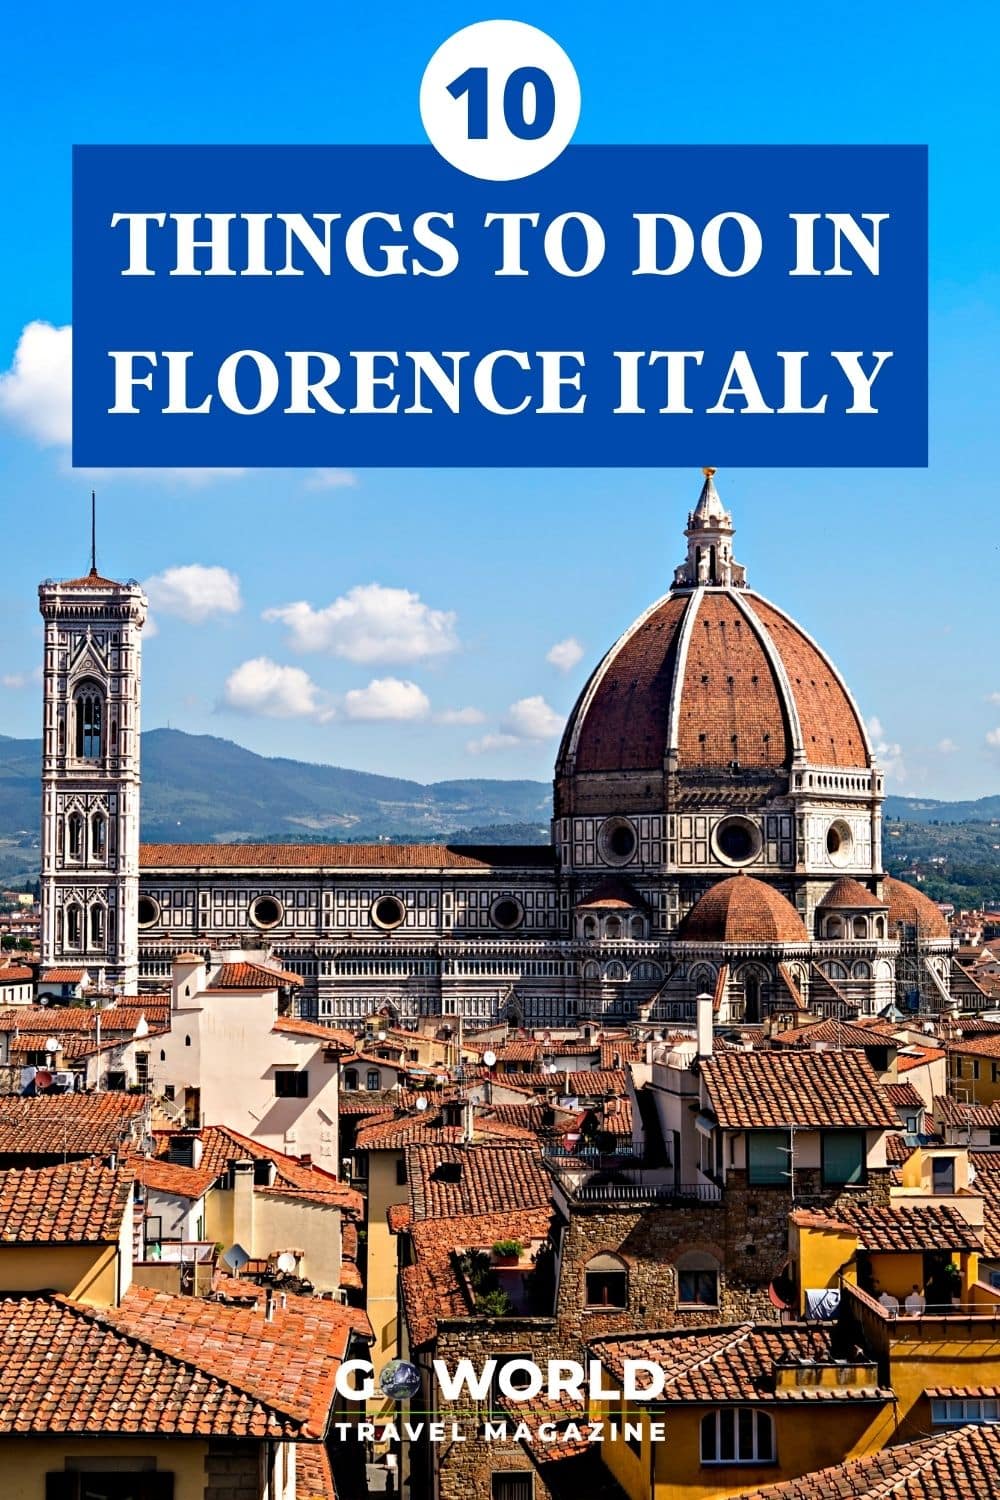 Immerse yourself in a world of artistic masterpieces, incredible food, history and achitecture with these top things to do in Florence, Italy. #florenceitaly